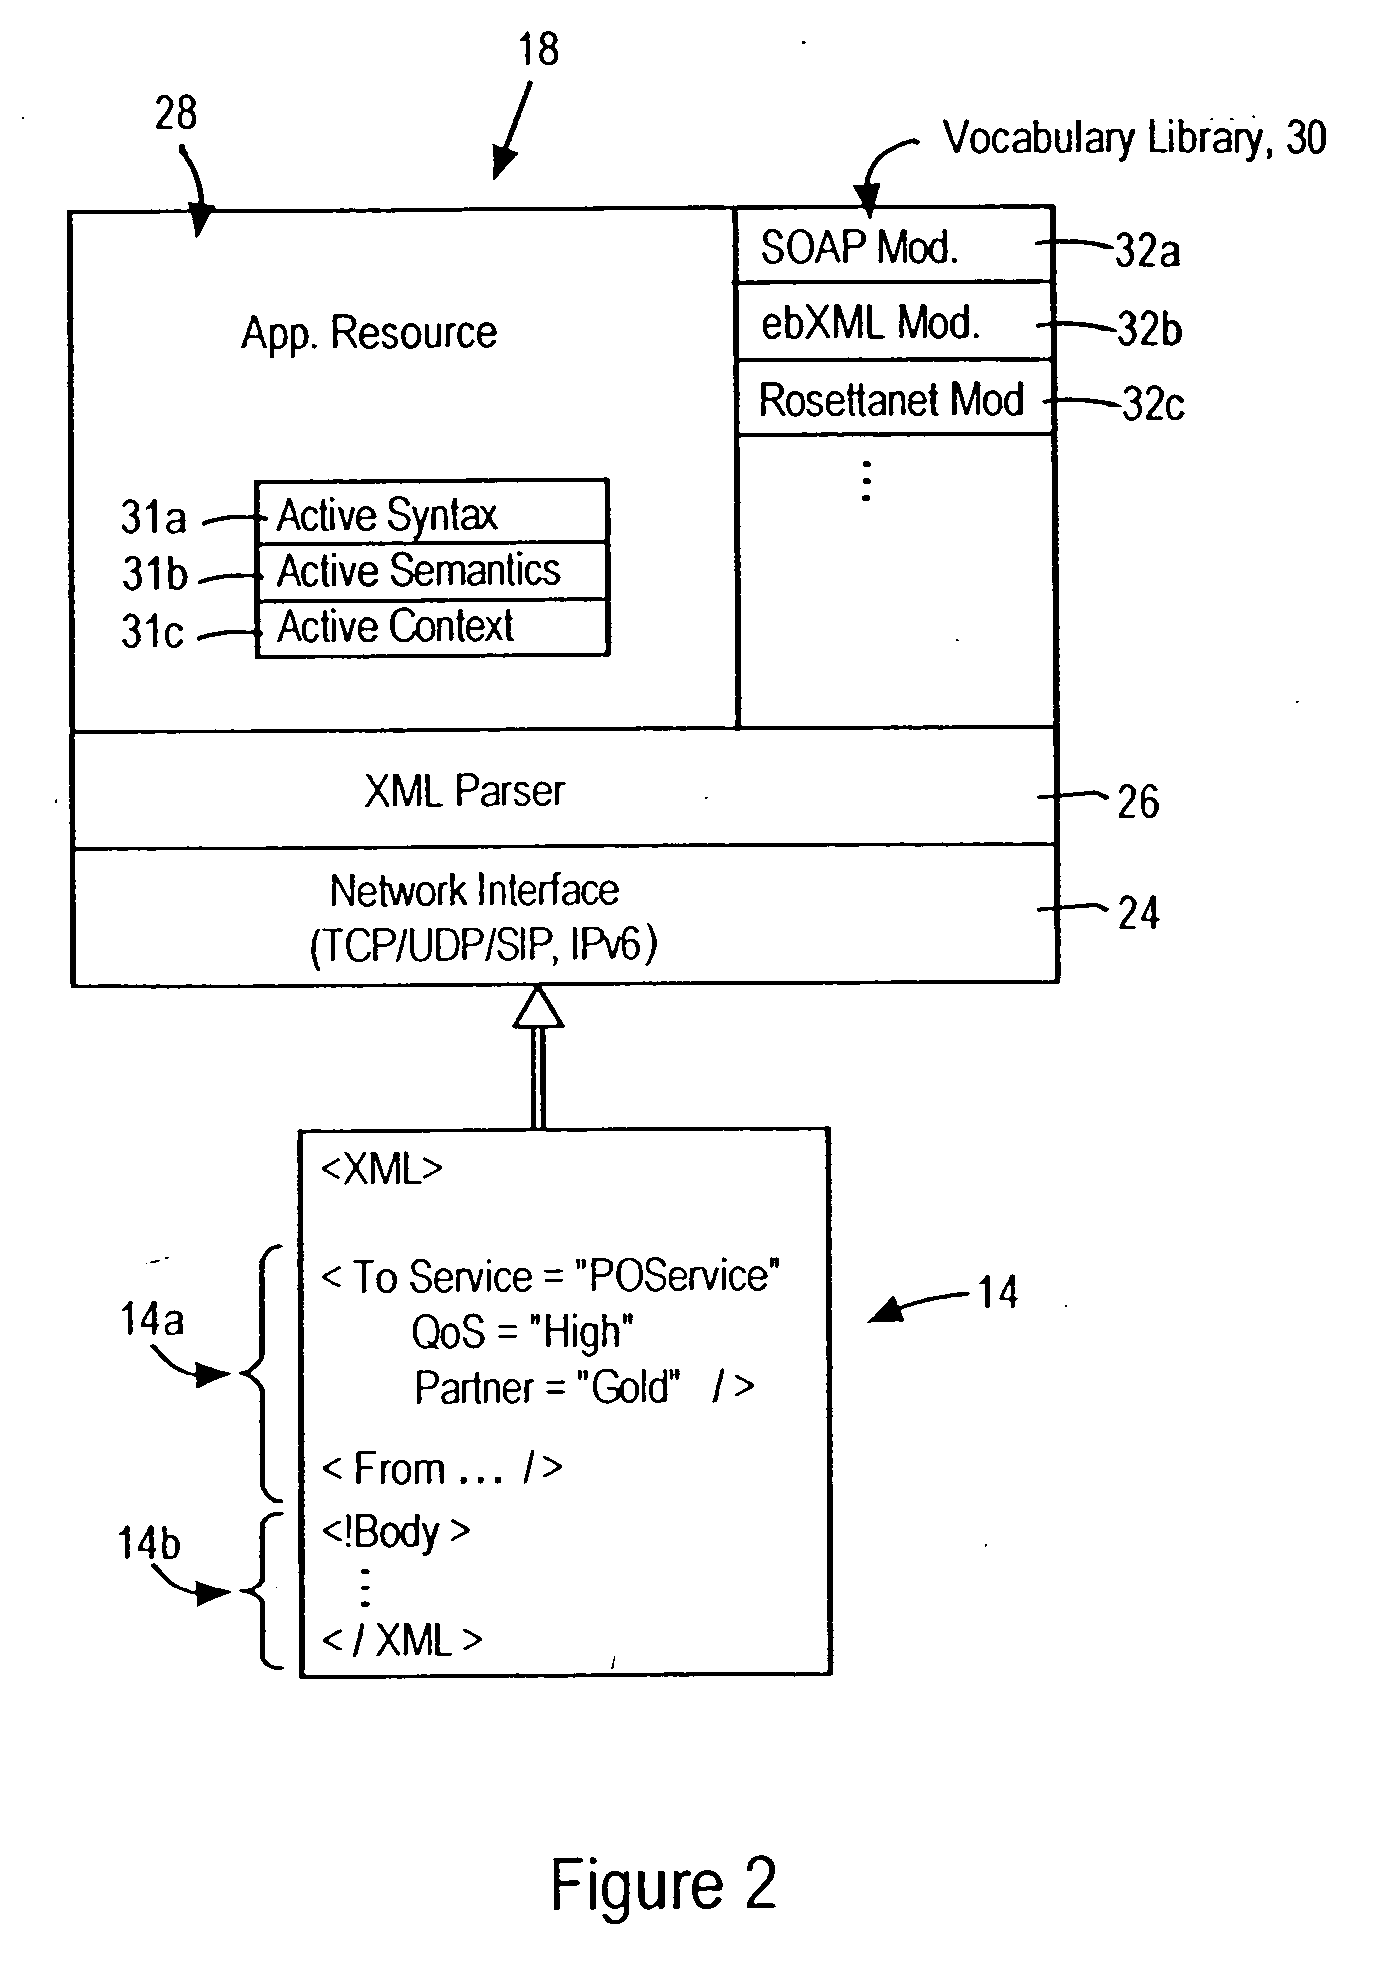 Network router configured for executing network operations based on parsing XML tags in a received XML document